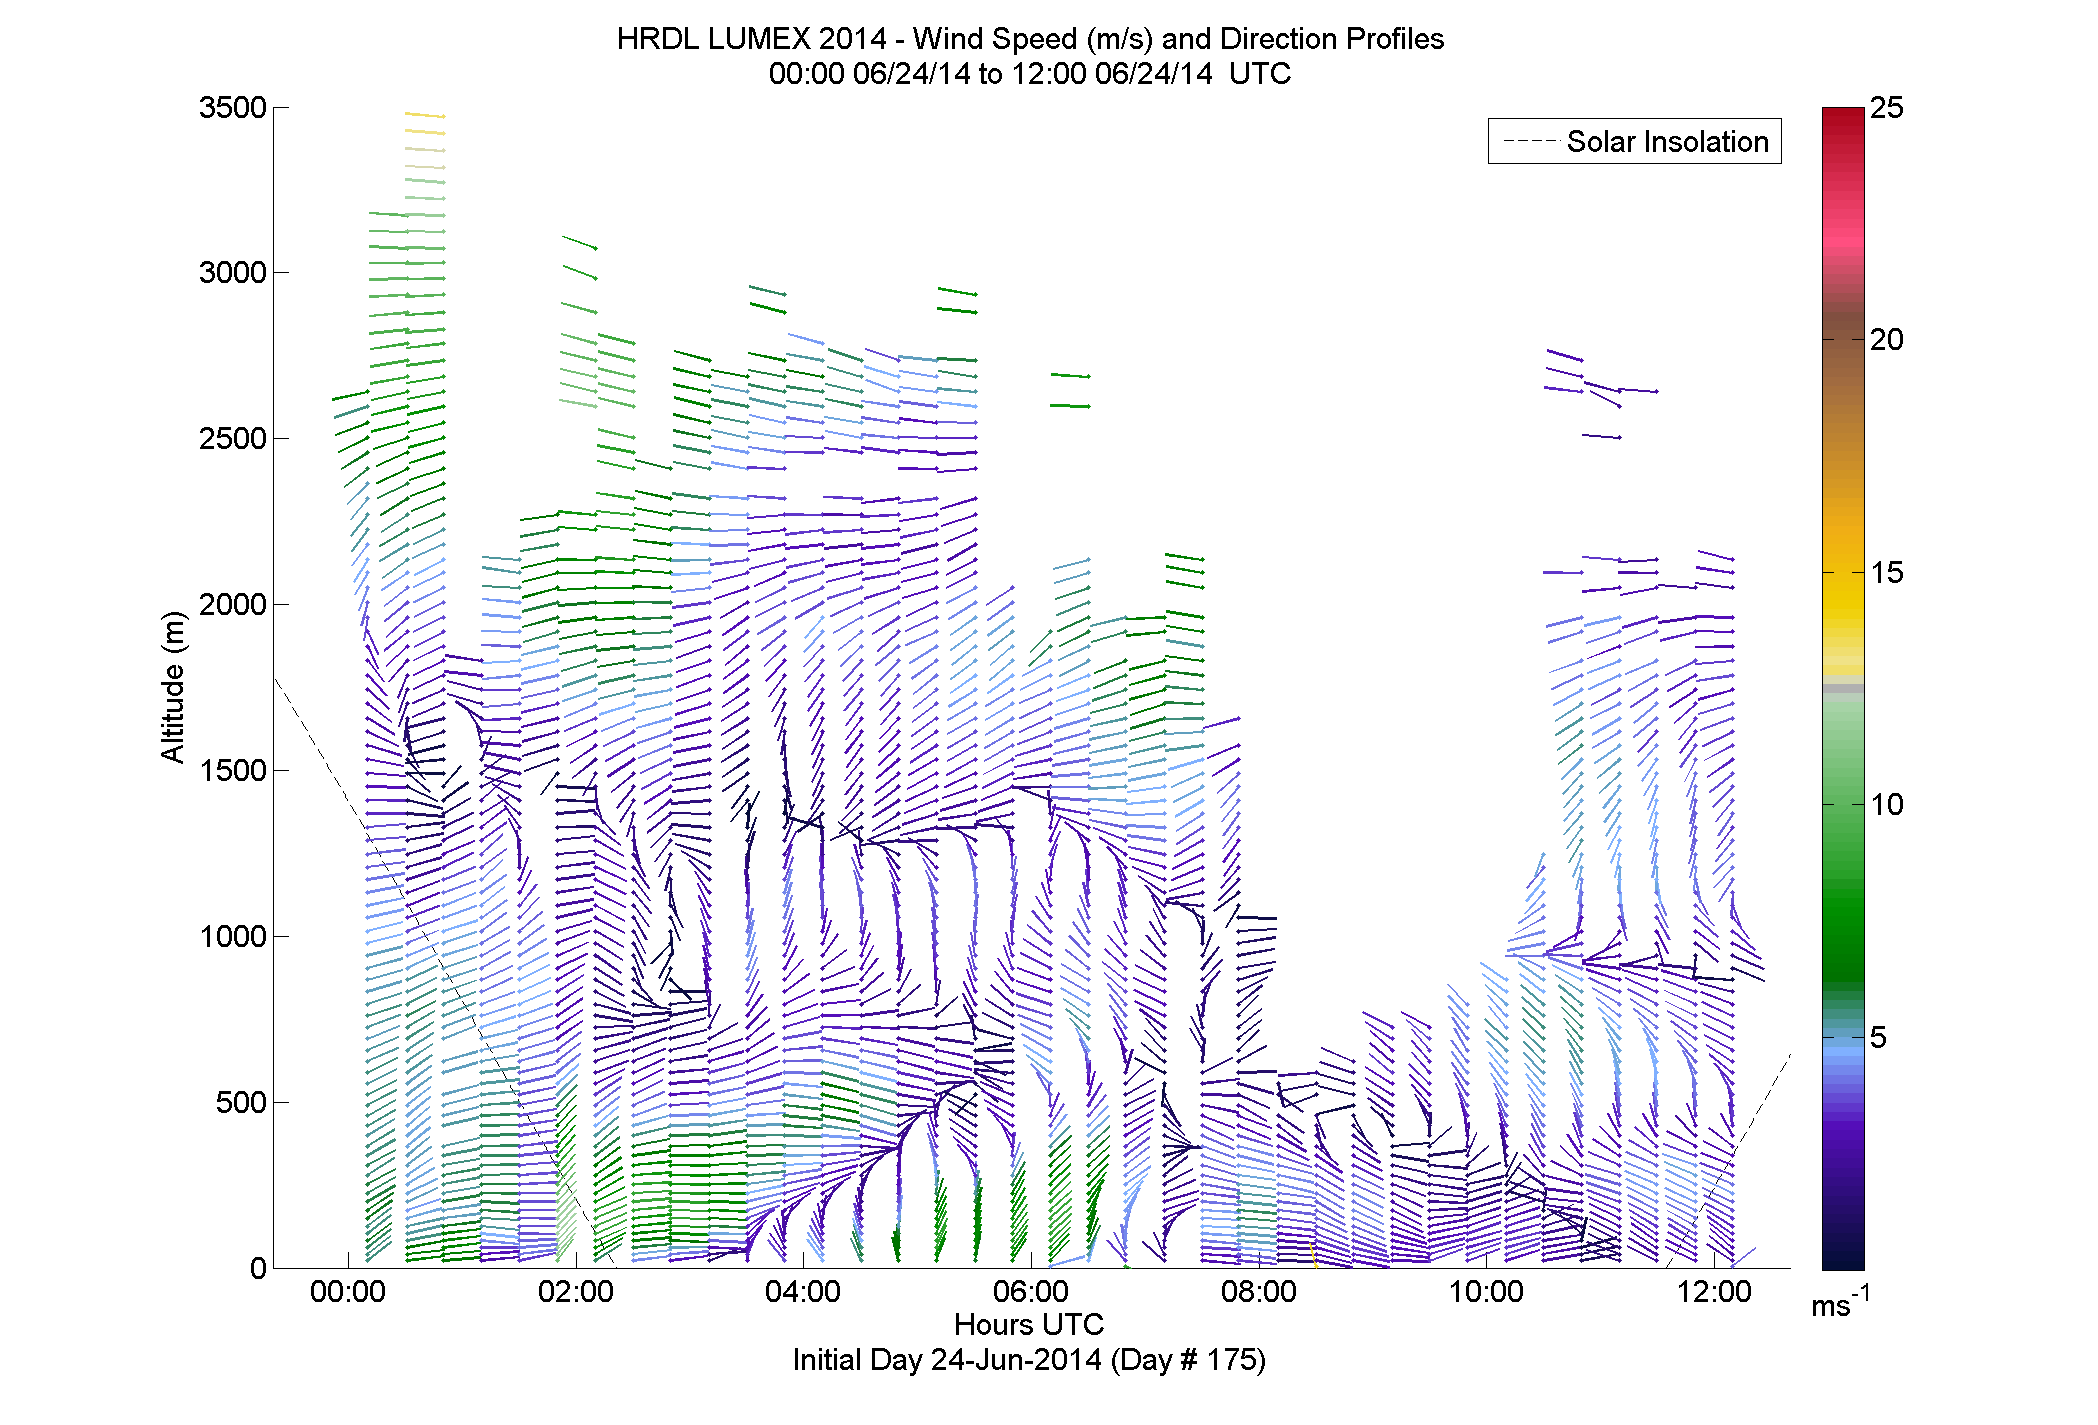 HRDL speed and direction profile - June 24 am